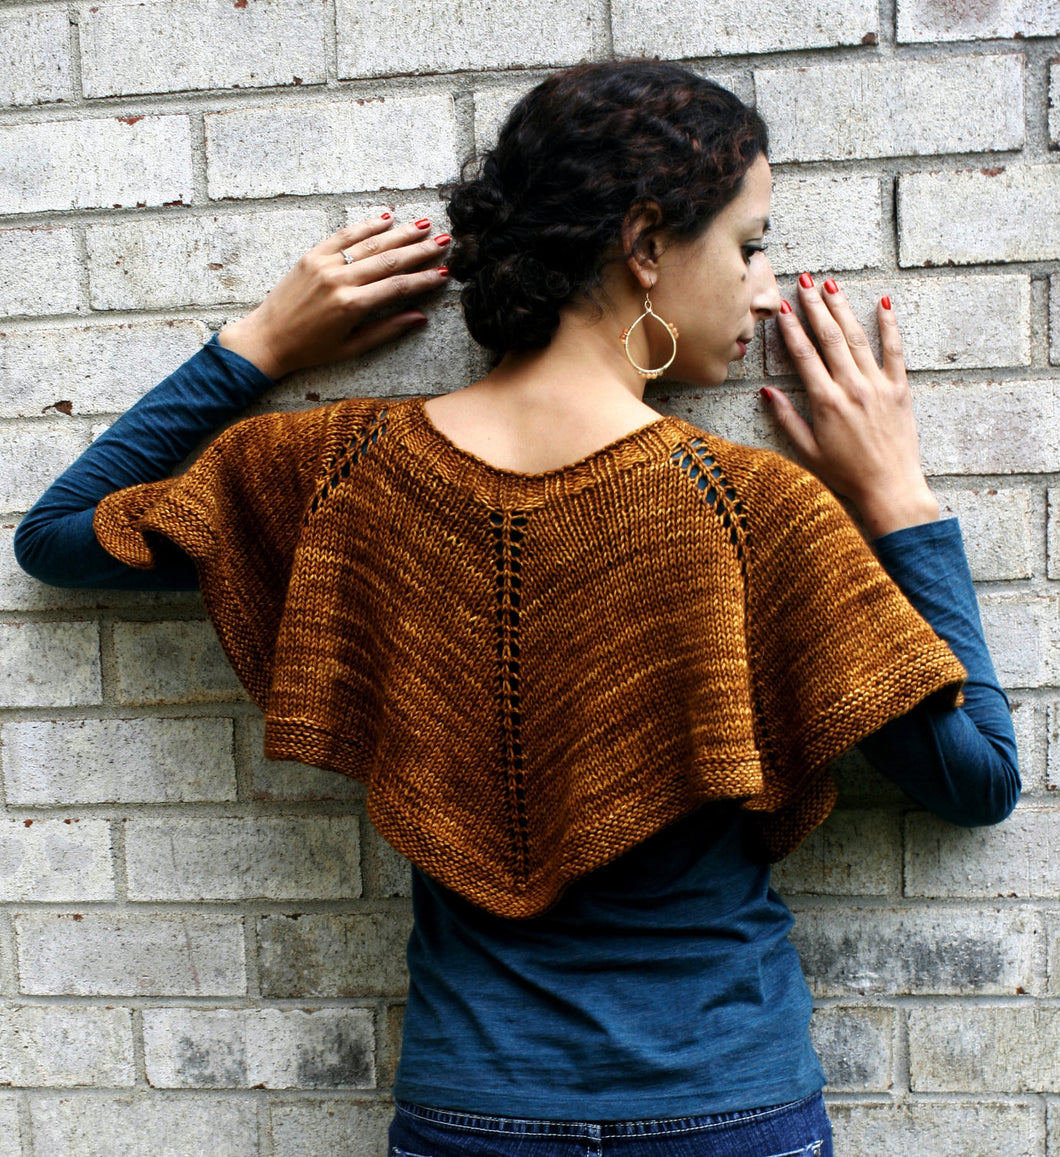 Capelet Duet Knitting Pattern Dk or Worsted Weight